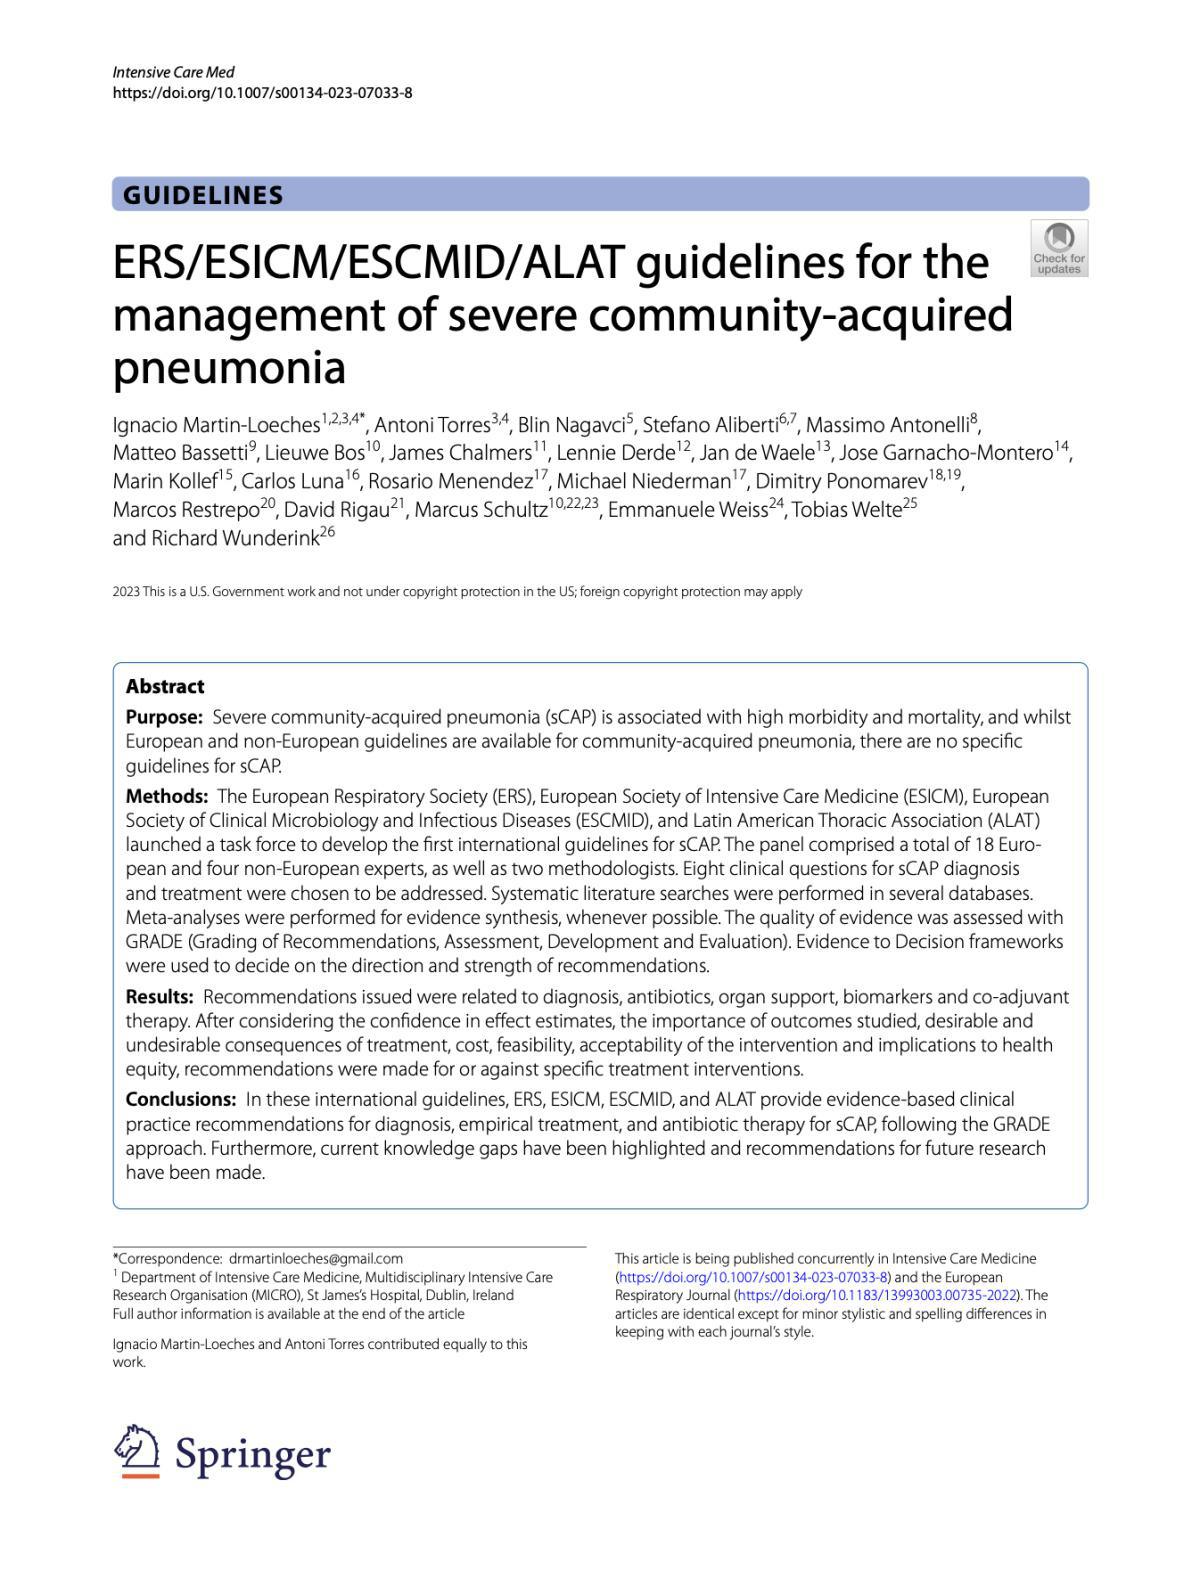 ERS/ESICM/ESCMID/ALAT guidelines for the management of severe community-acquired pneumonia